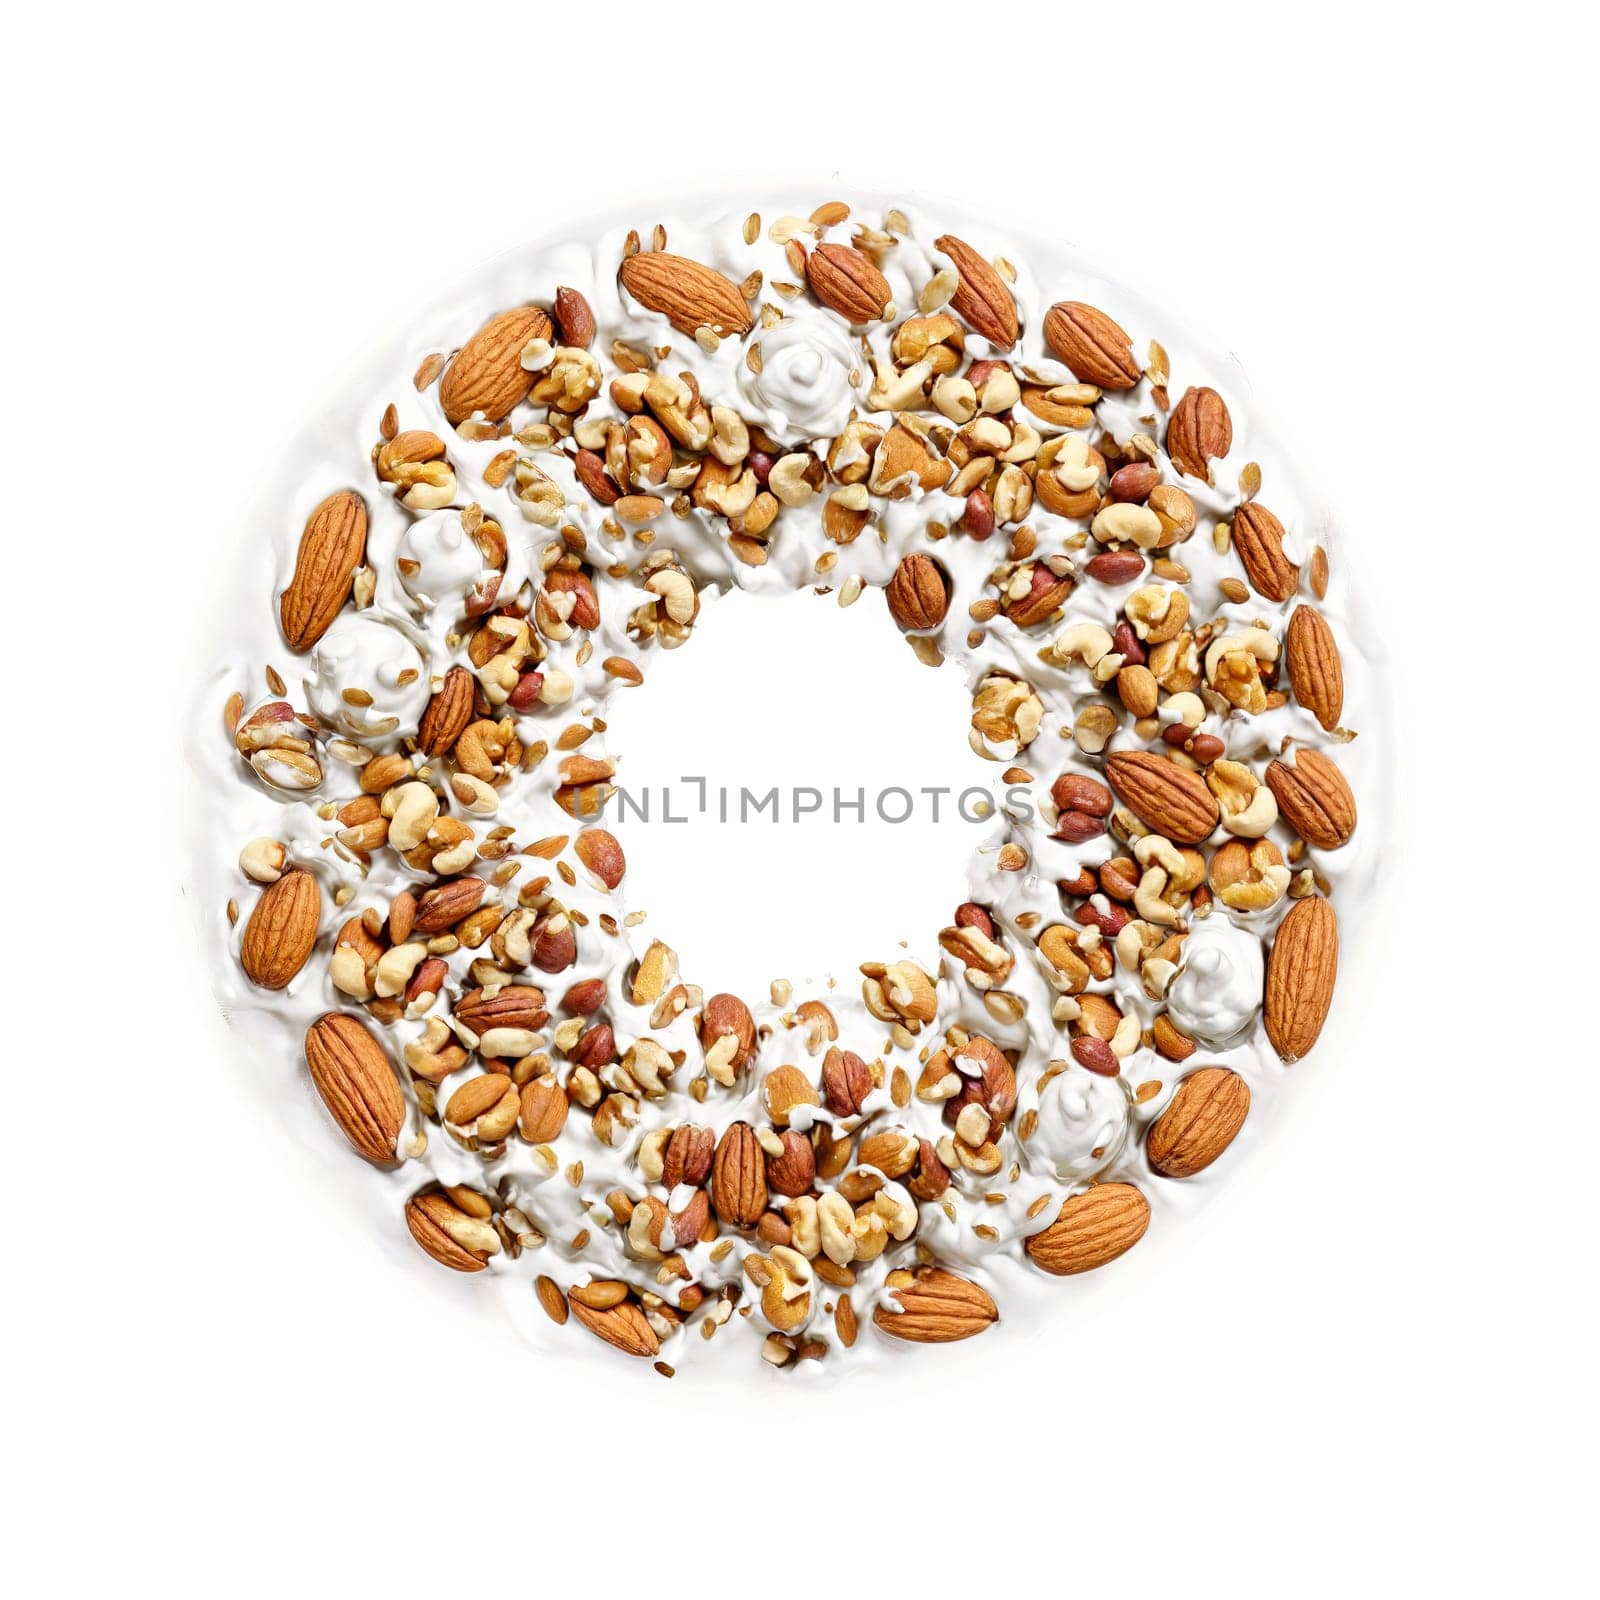 Yogurt coated nut mix mandala floating yogurt covered nuts and seeds Food and culinary concept. Food isolated on transparent background.